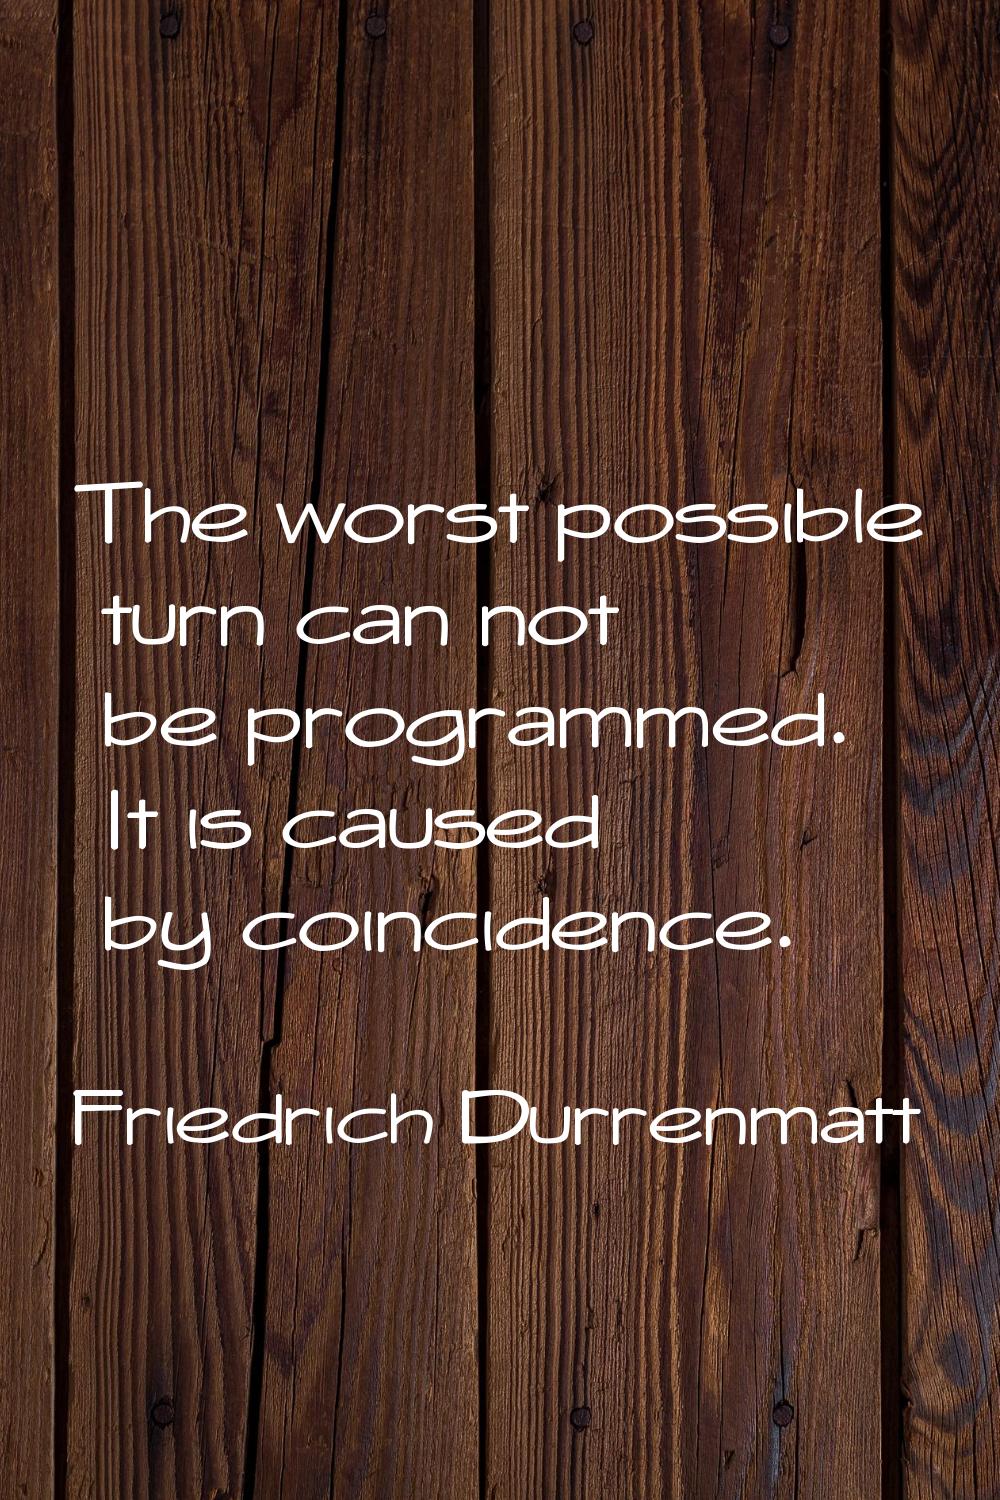 The worst possible turn can not be programmed. It is caused by coincidence.